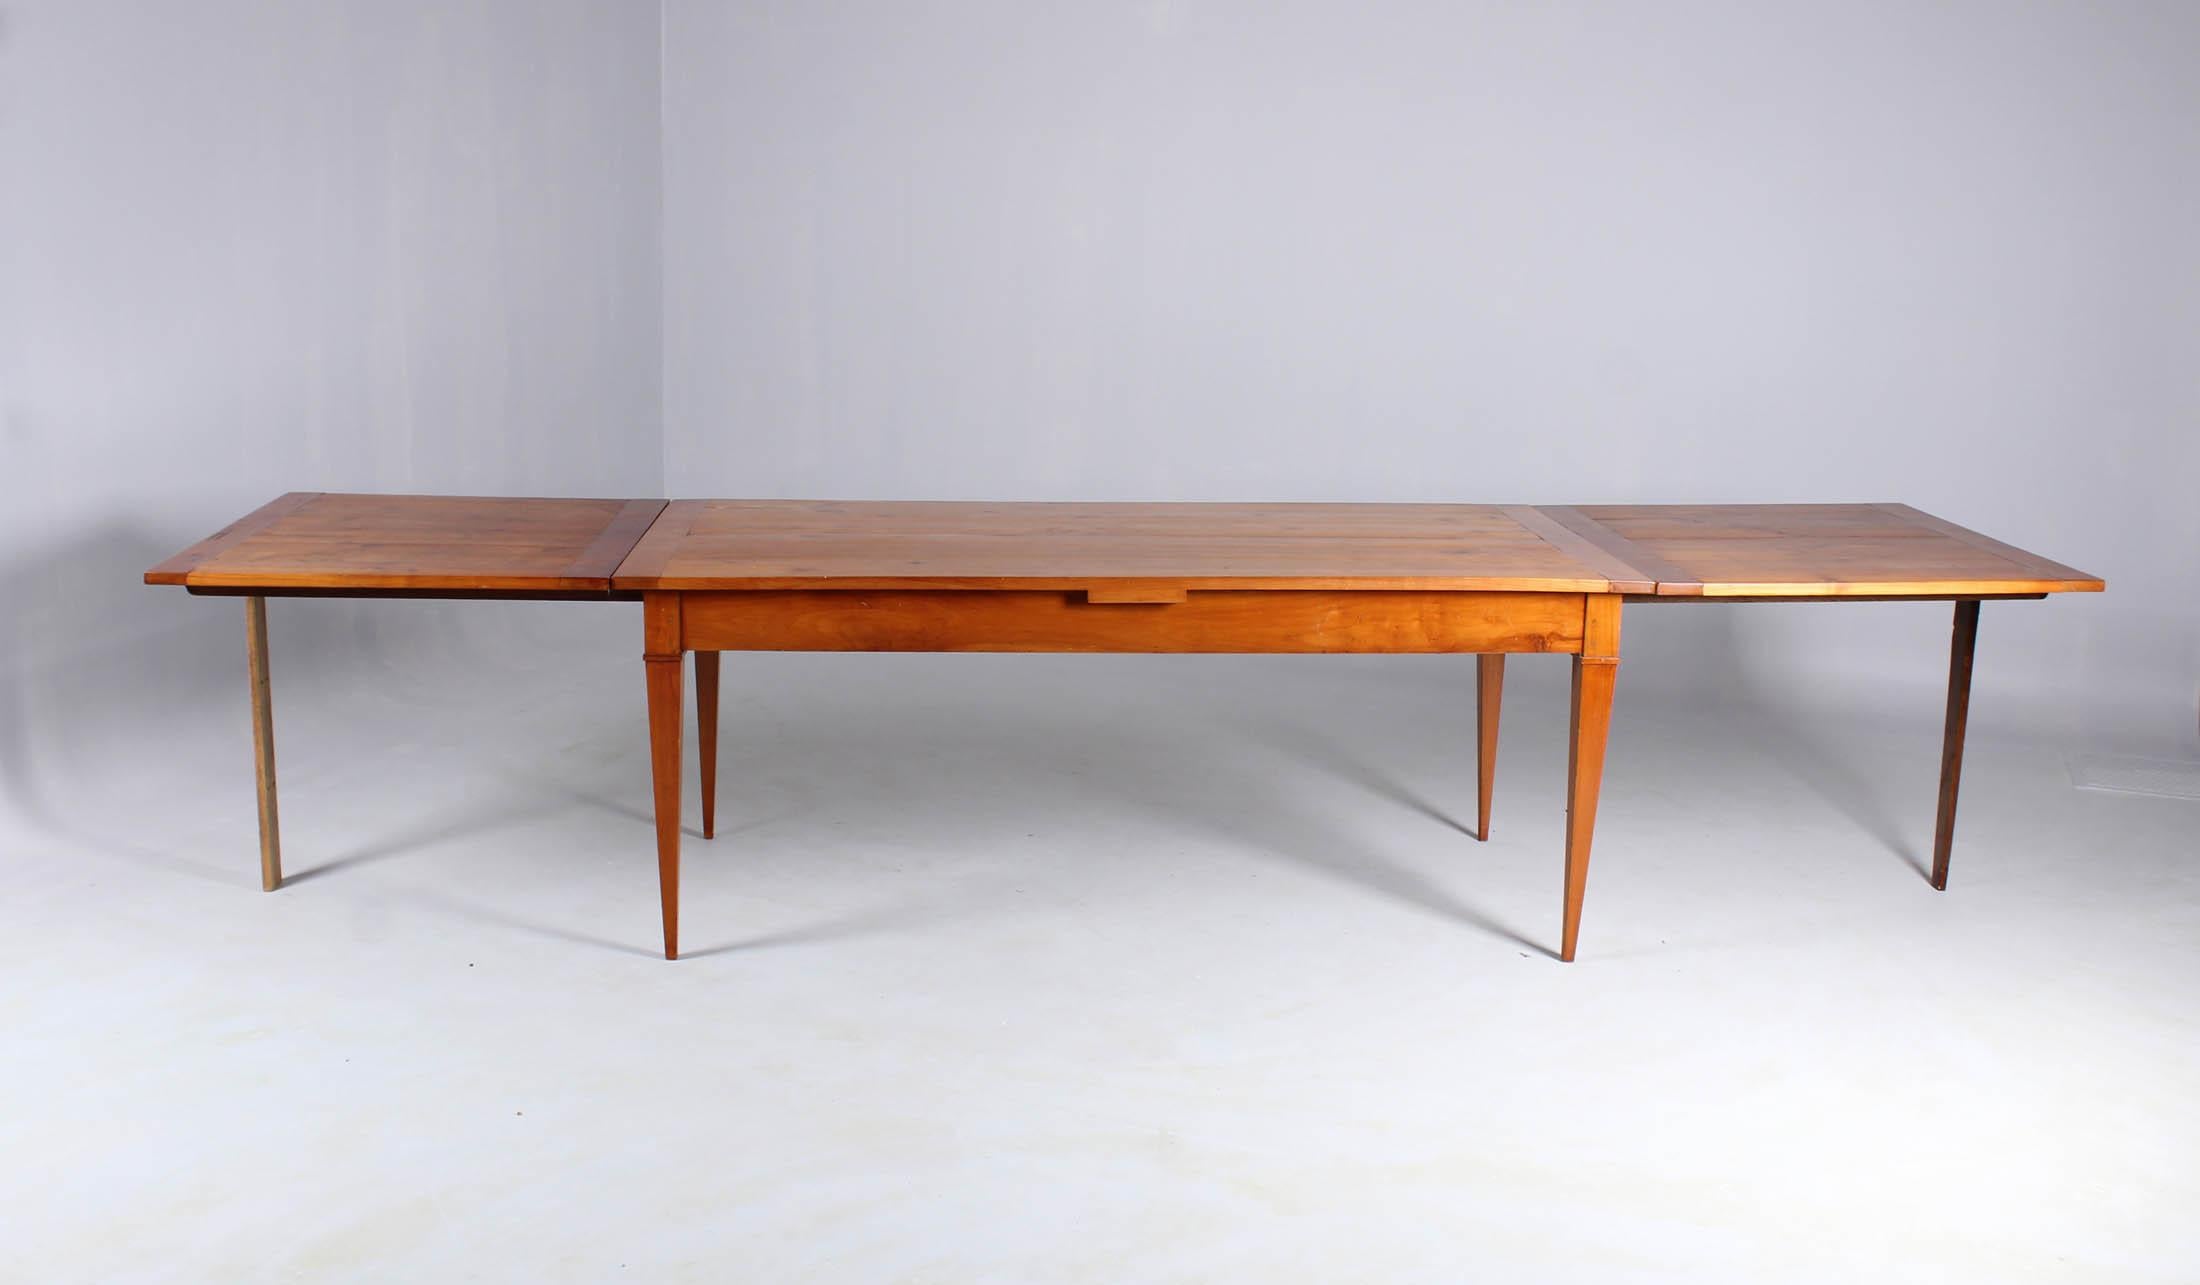 19th Century French Country House Table, 12-14 Persons, Solid Cherry, circa 1850 3